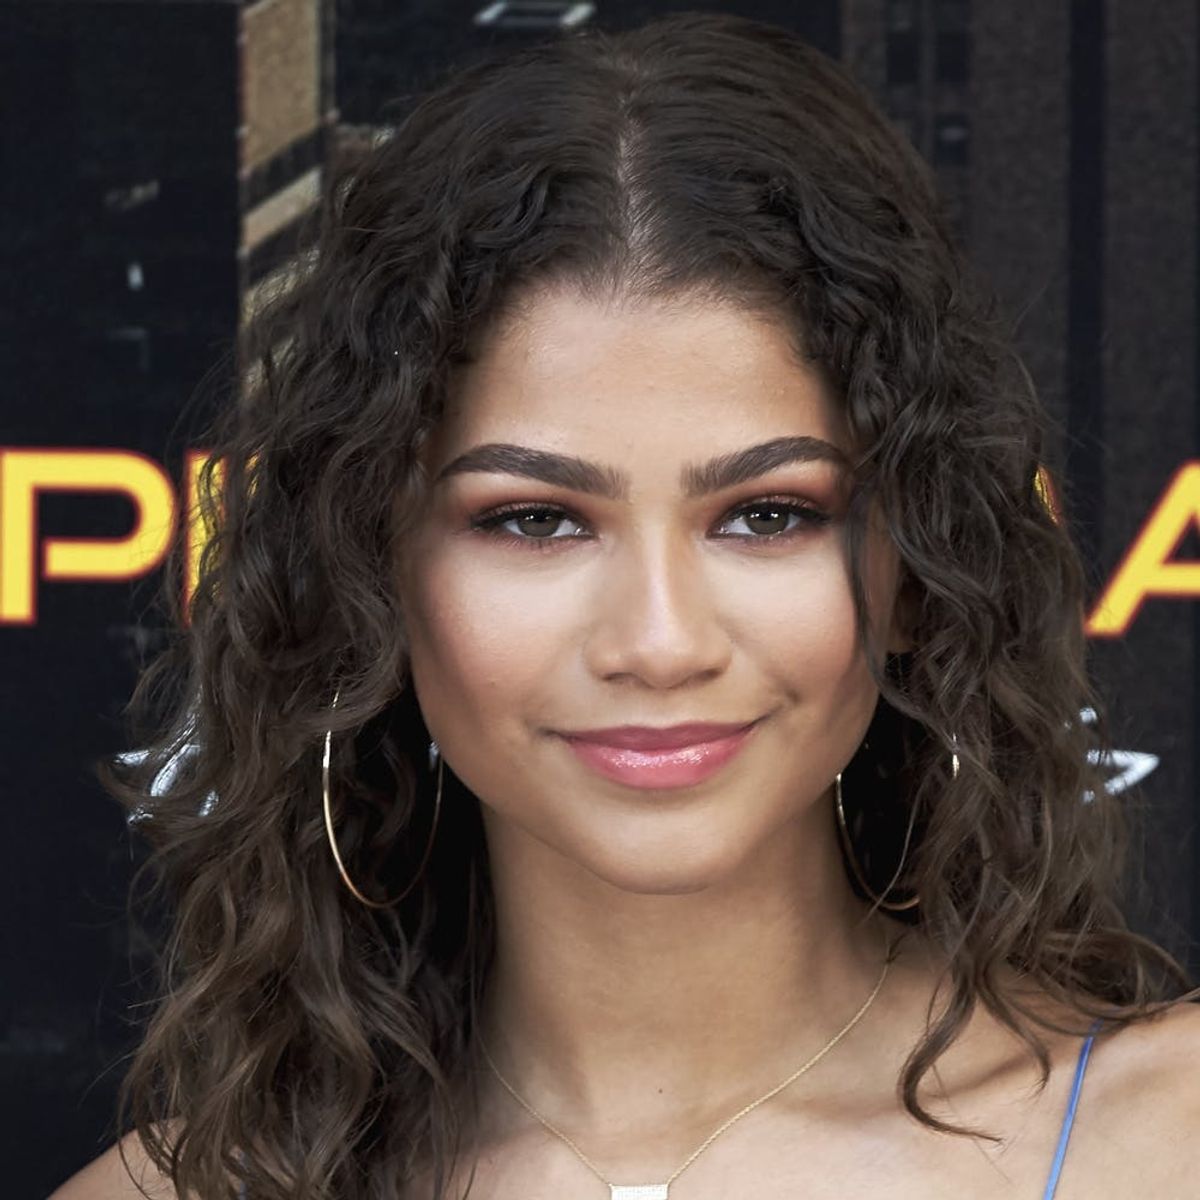 Zendaya Had *This* to Say to the Girl Who Got in Trouble at School for Copying Her Look